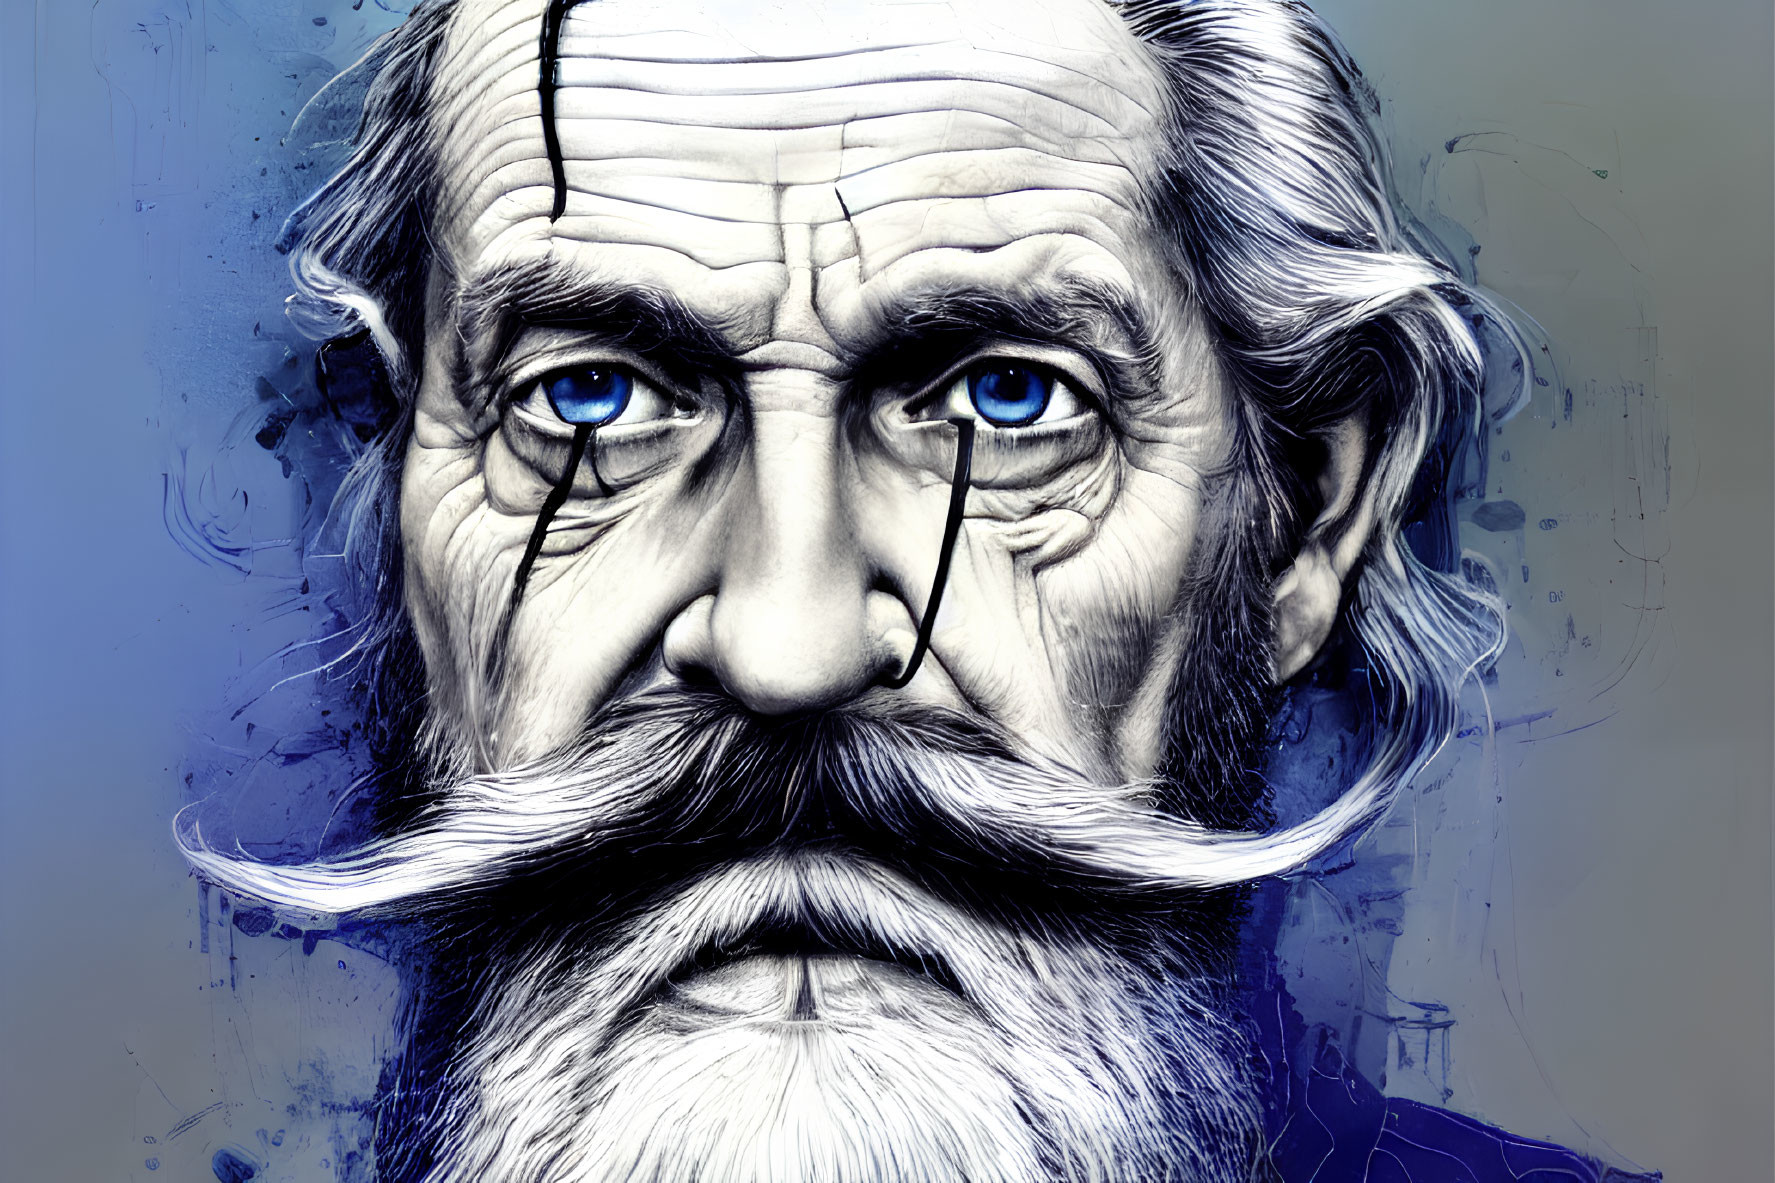 Detailed portrait of a man with blue eyes and white mustache on blue background